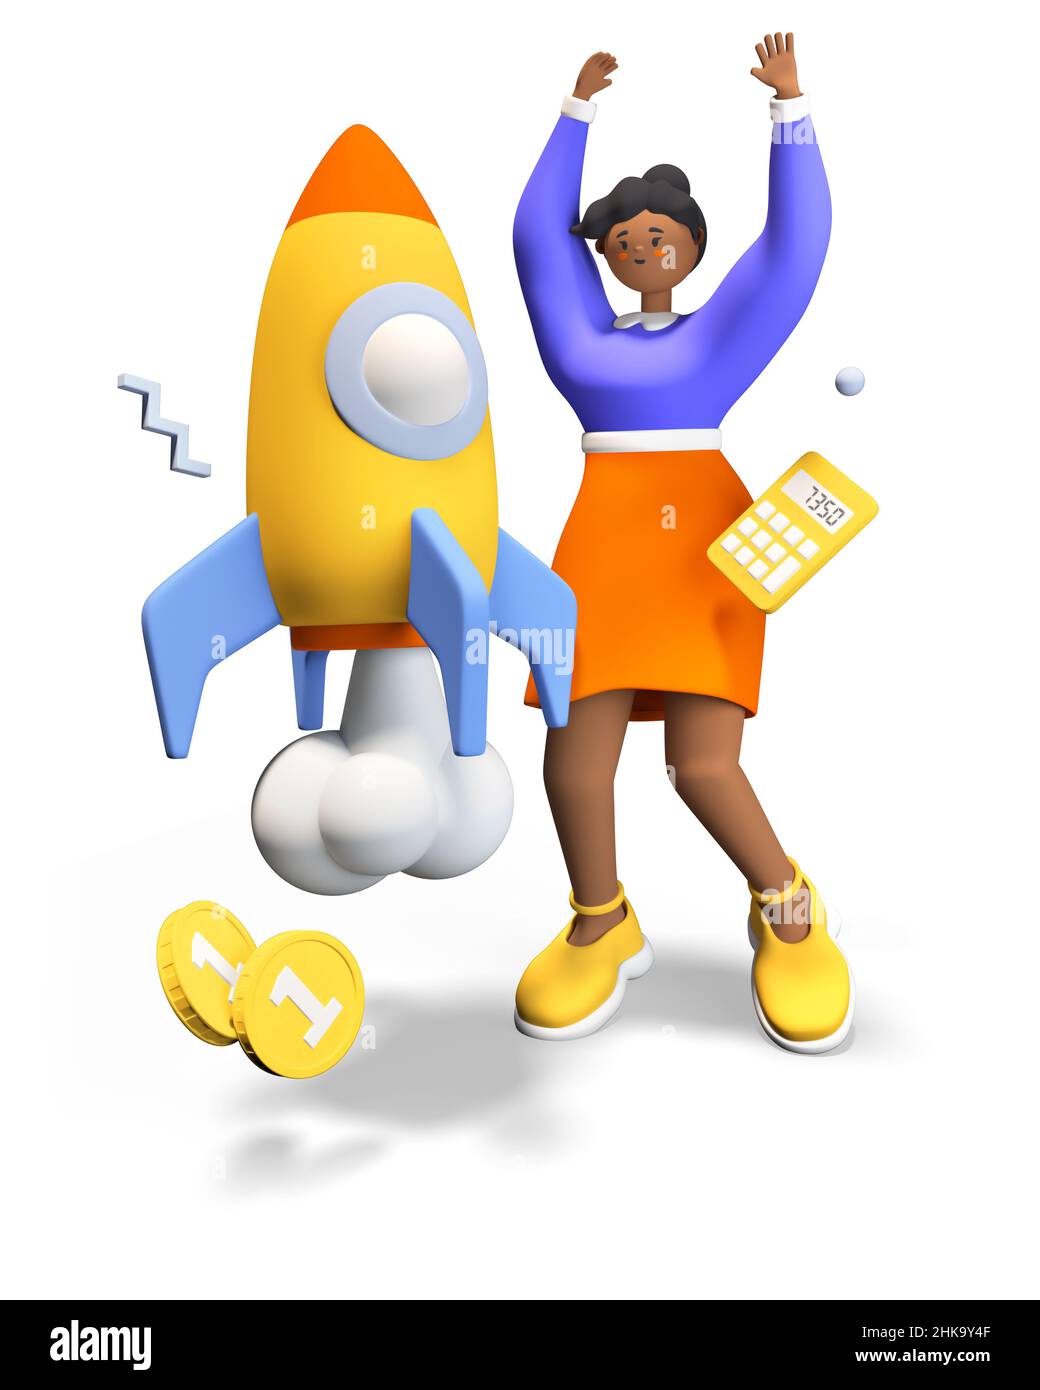 Startup launch - modern colorful 3D style illustration with cartoon character. Young African American girl happy to takeoff the rocket, which symboliz Stock Photo